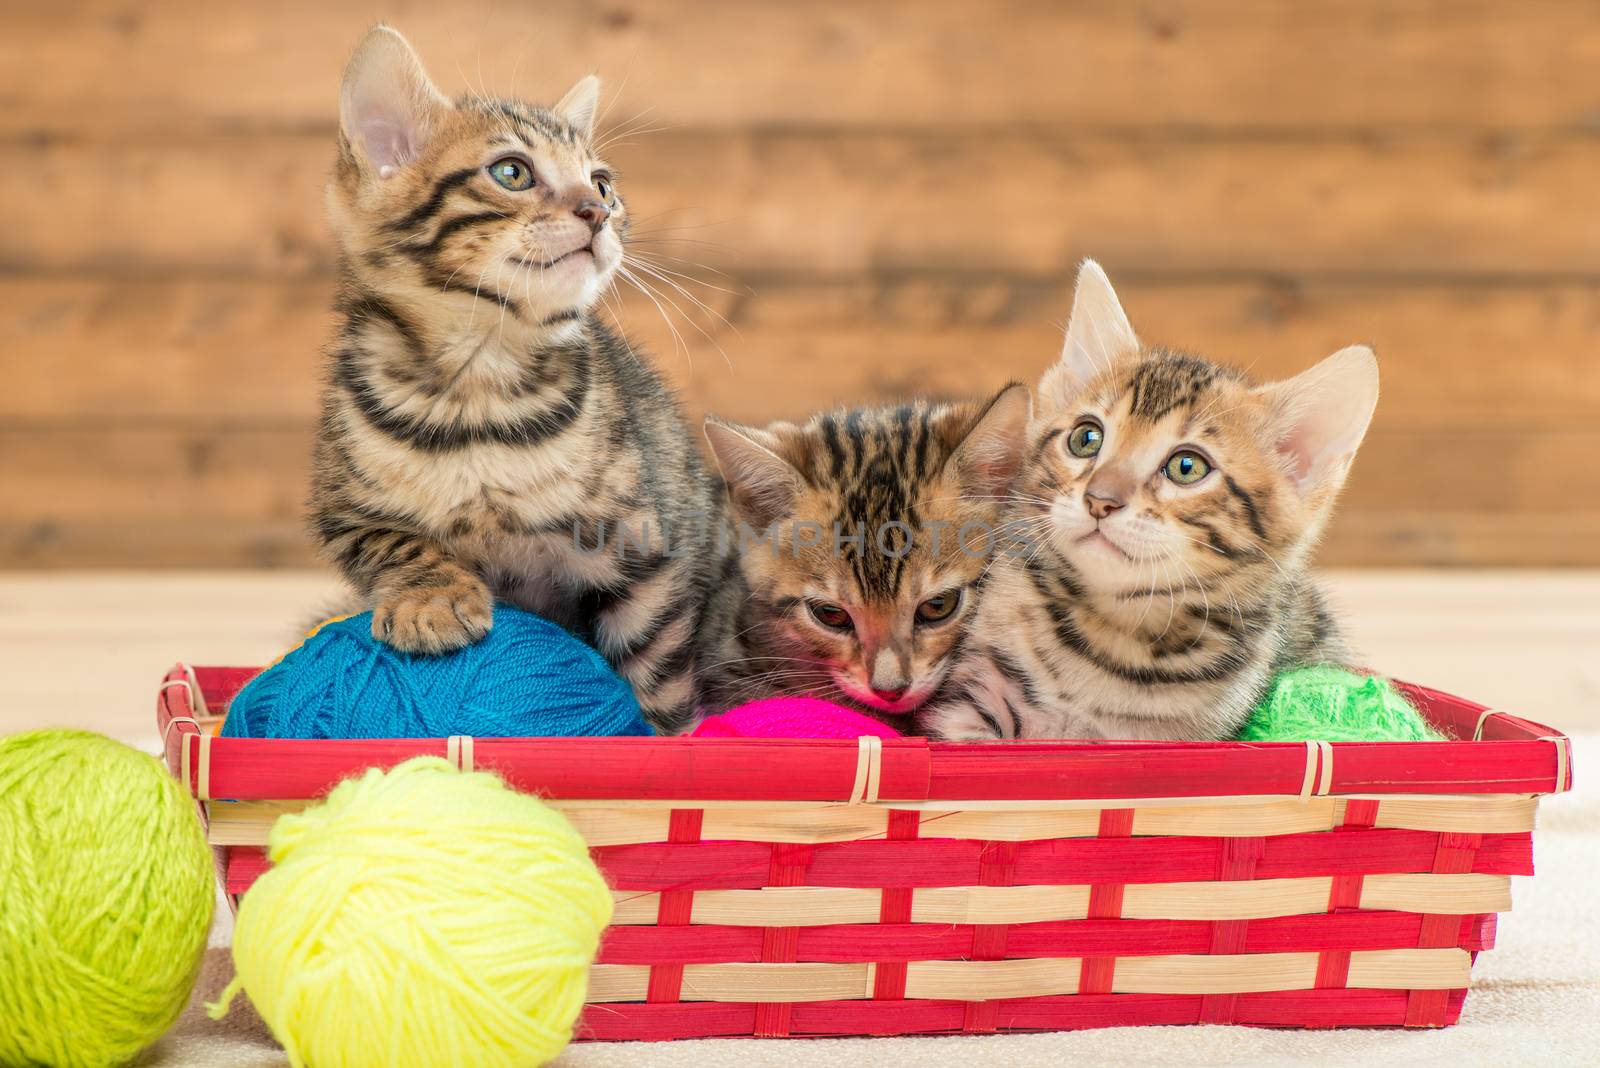 in the wicker basket sit three kittens of the Bengal breed playi by kosmsos111